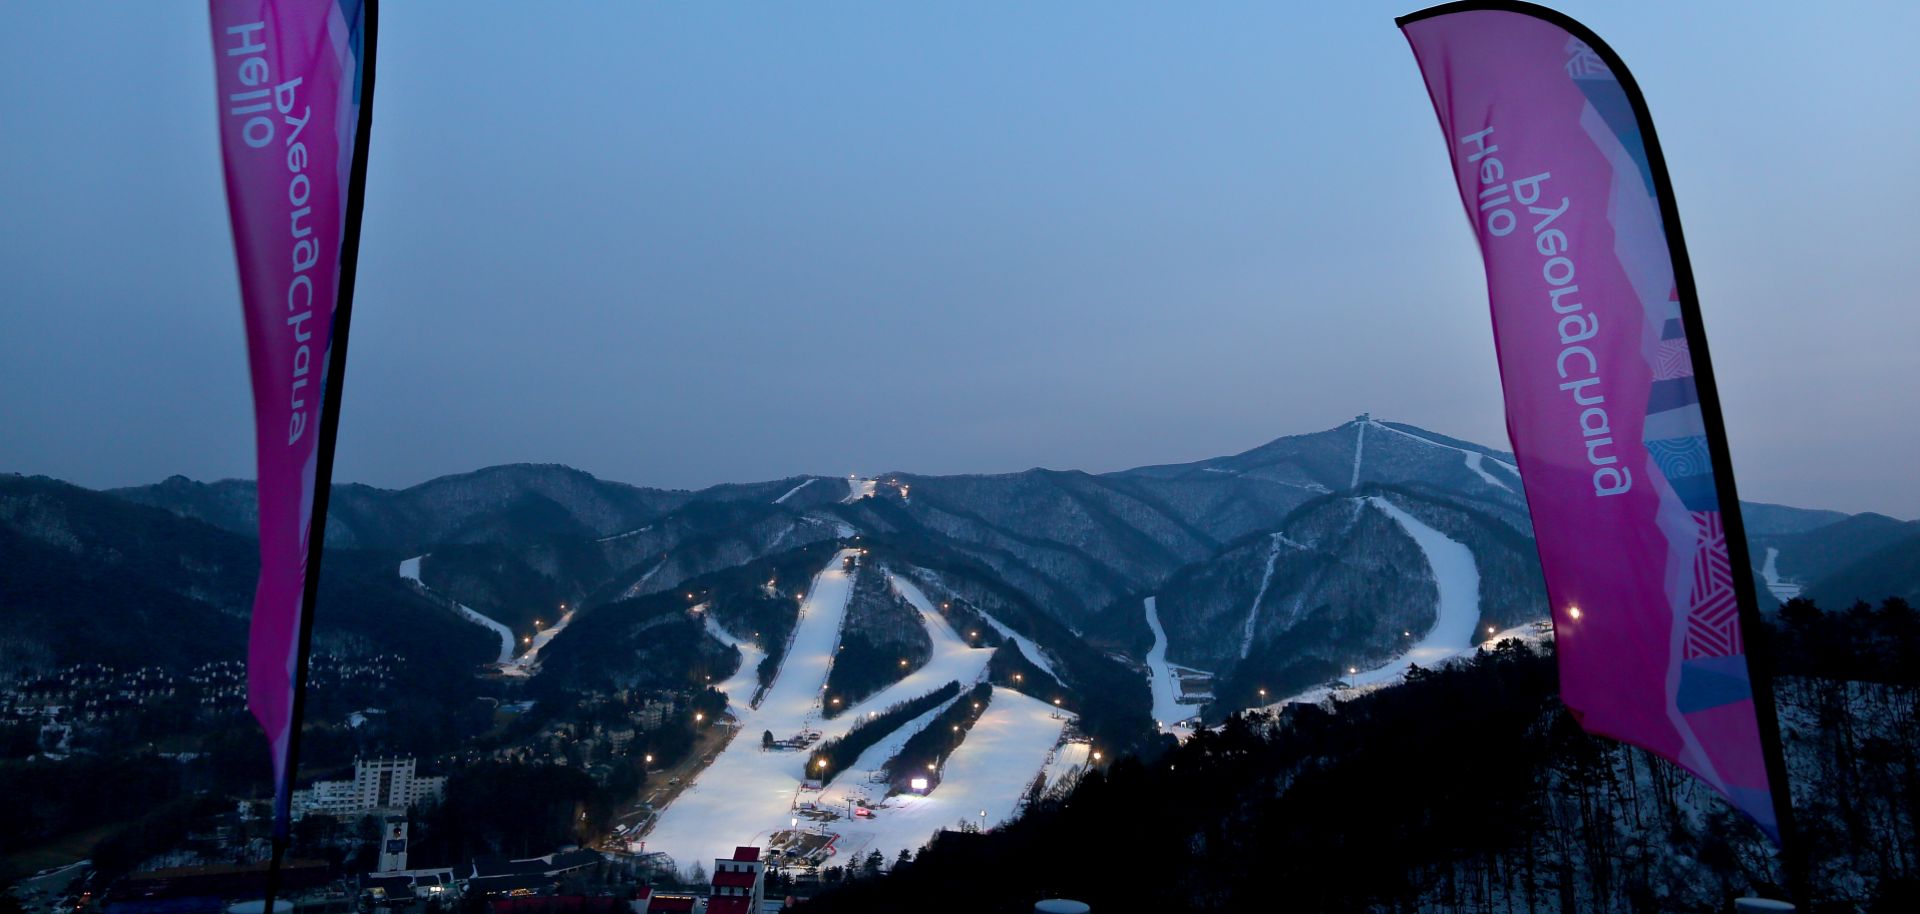 The Pyeongchang Mountain Cluster that is the site of the 2018 Winter Olympics in South Korea.